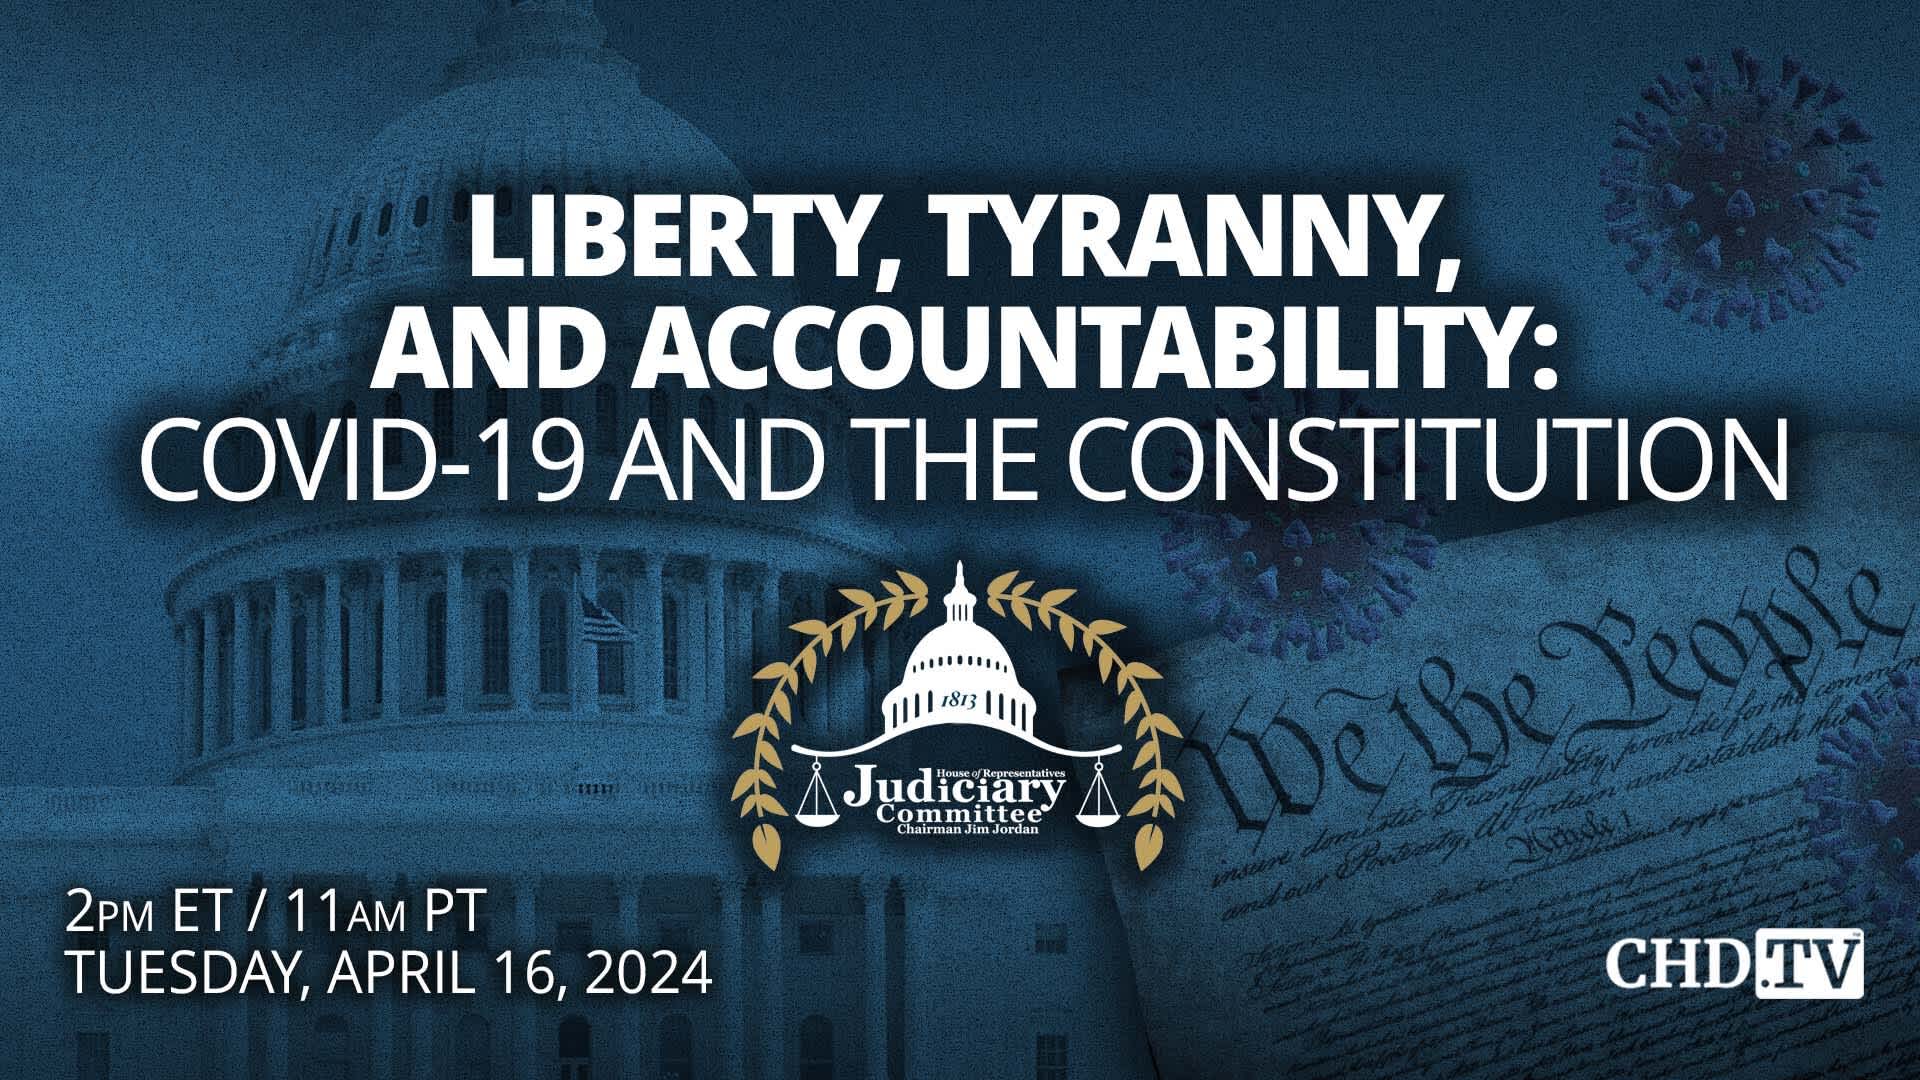 Liberty, Tyranny, and Accountability: Covid-19 and the Constitution | Apr. 16